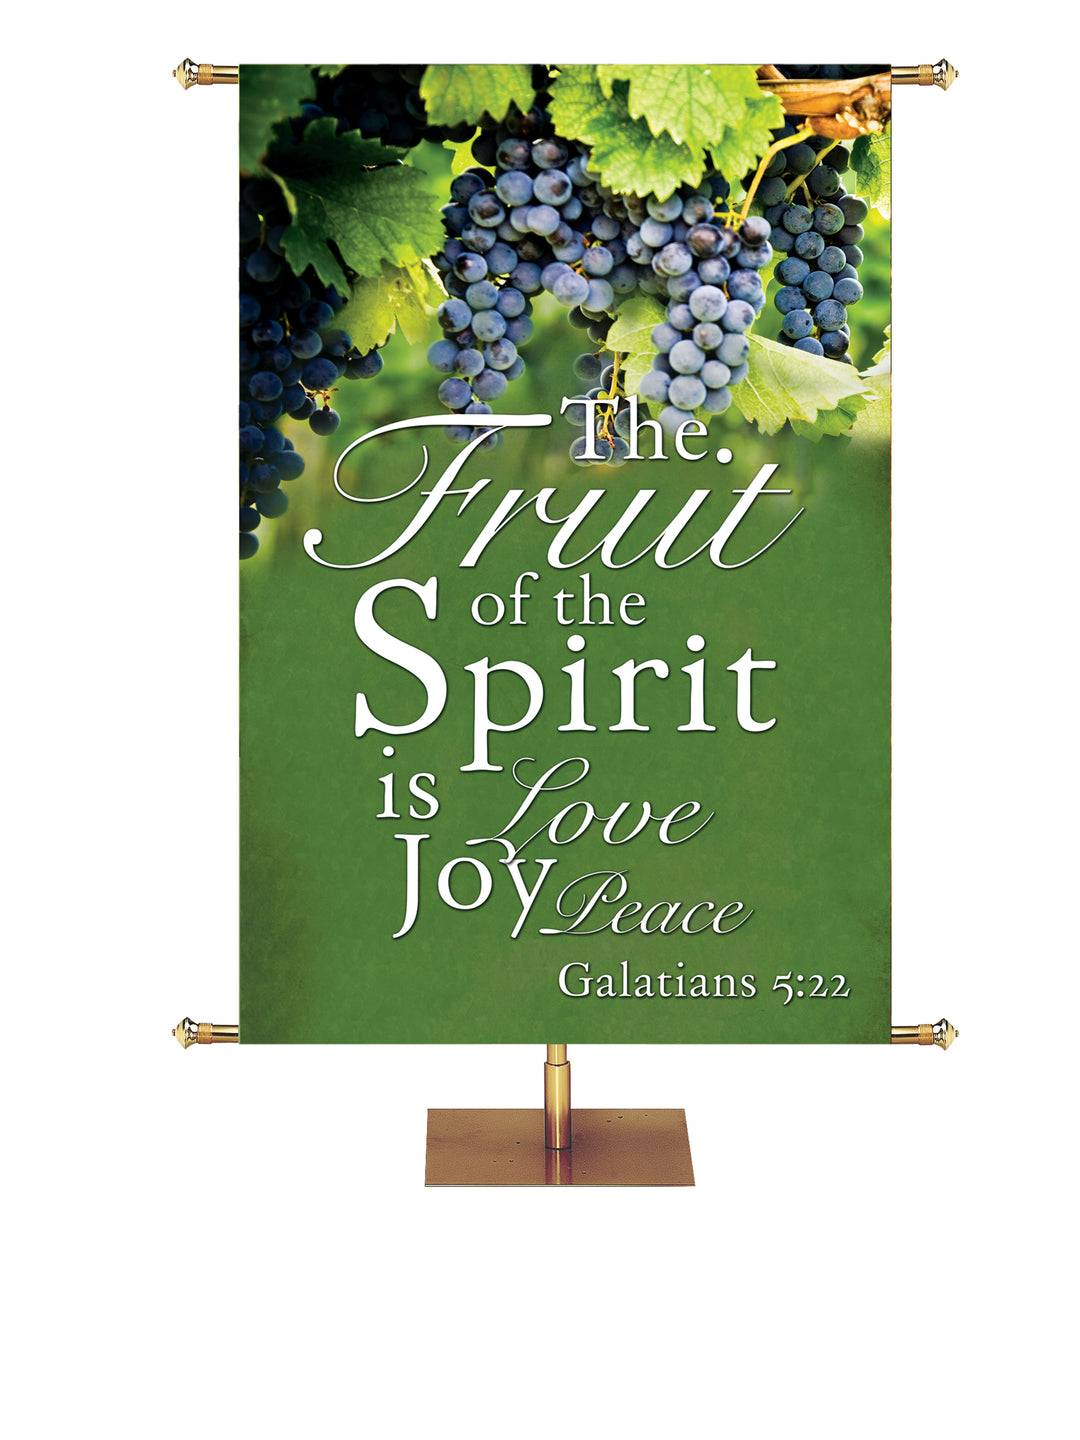 Fruit of the Spirit Love, Joy, Peace Banner with grapes on green